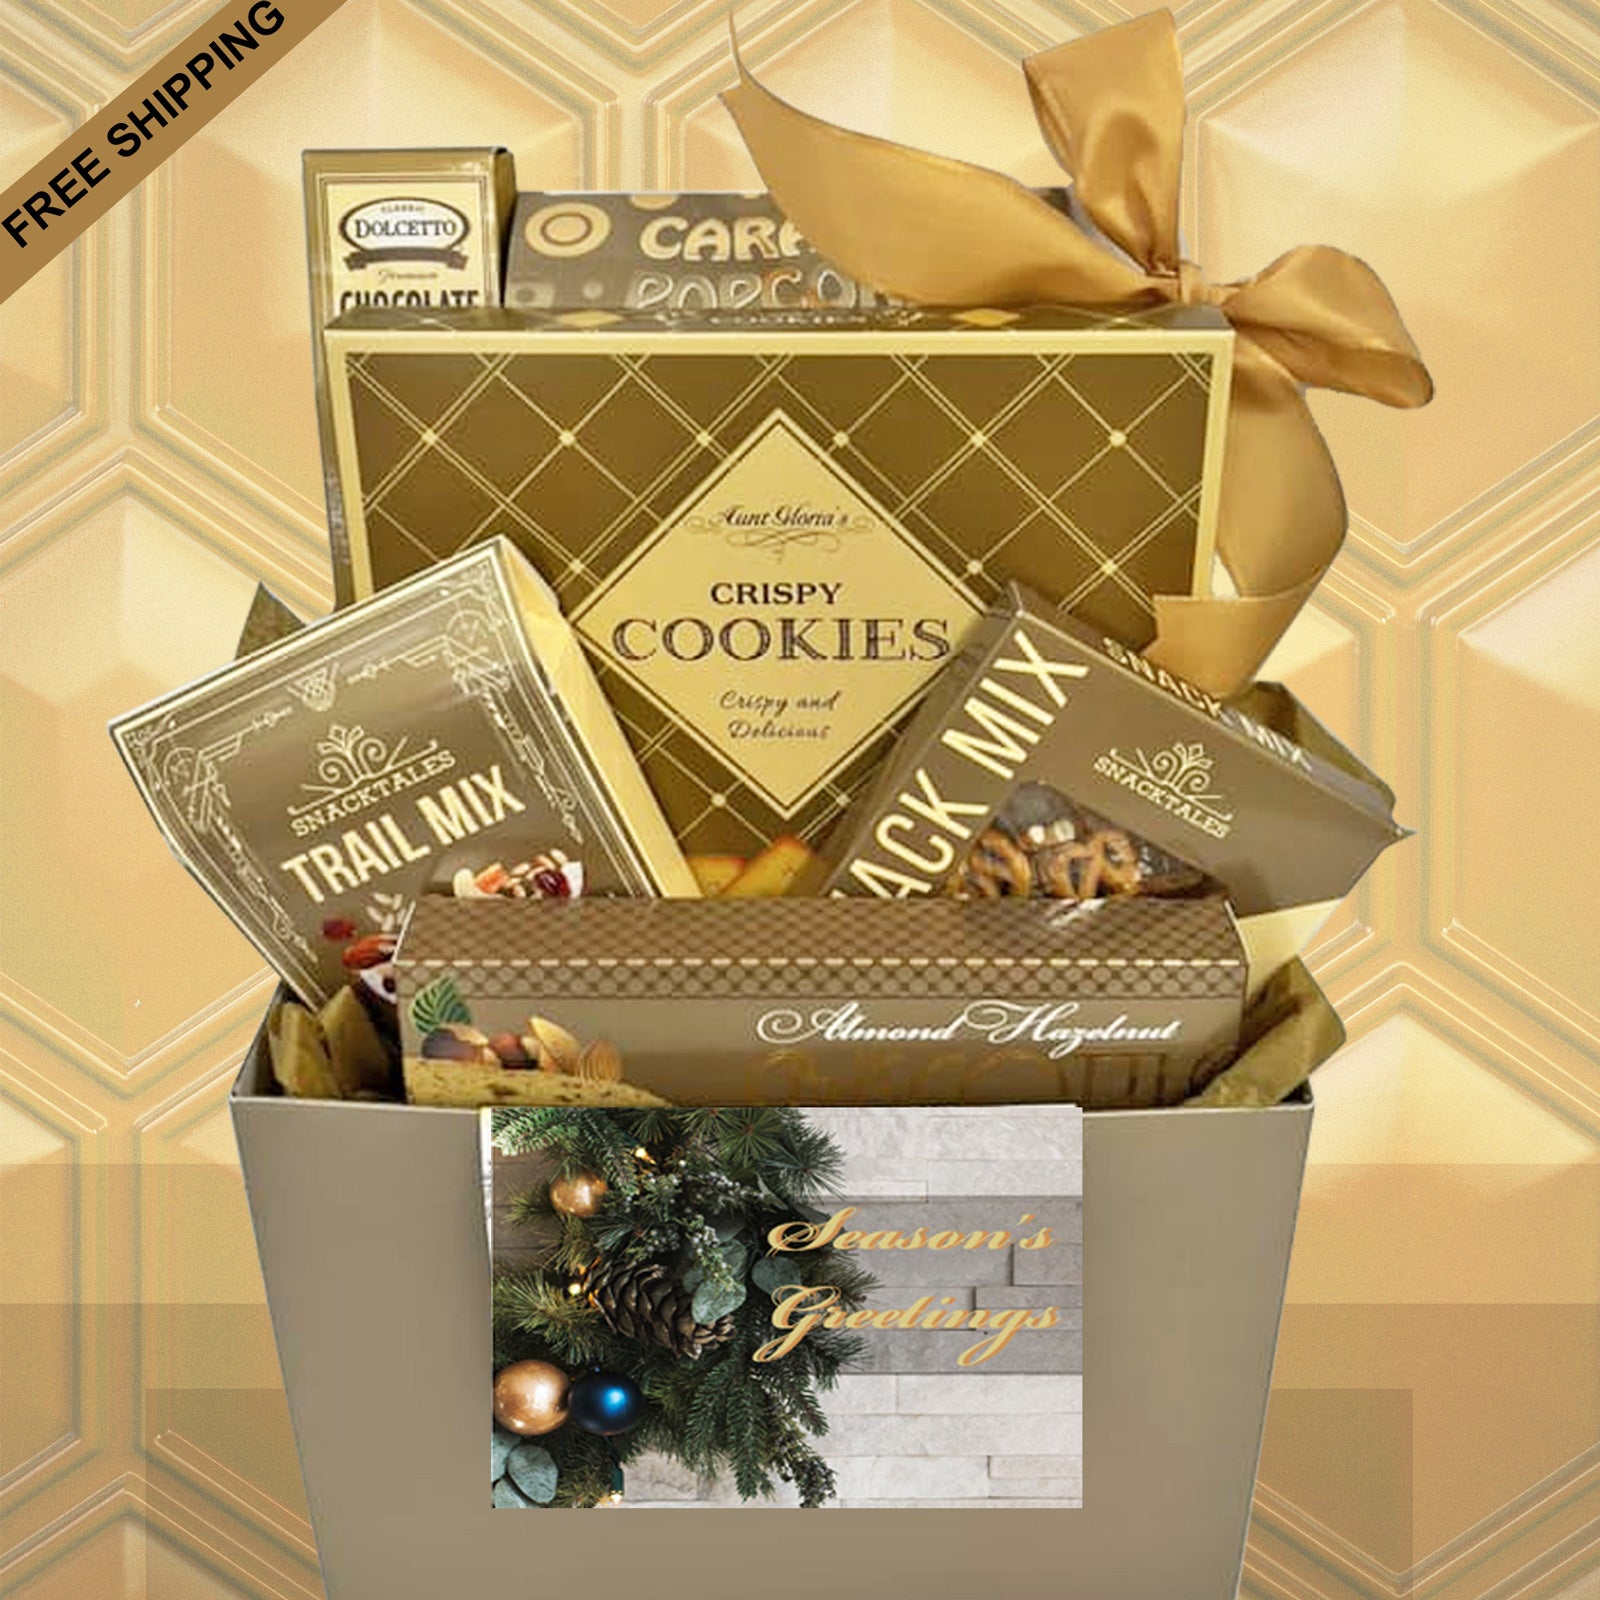 Season's Greetings Holiday Gift Box Gourmet Gift for Sending Christmas Cheer to Loved Ones Far and Near